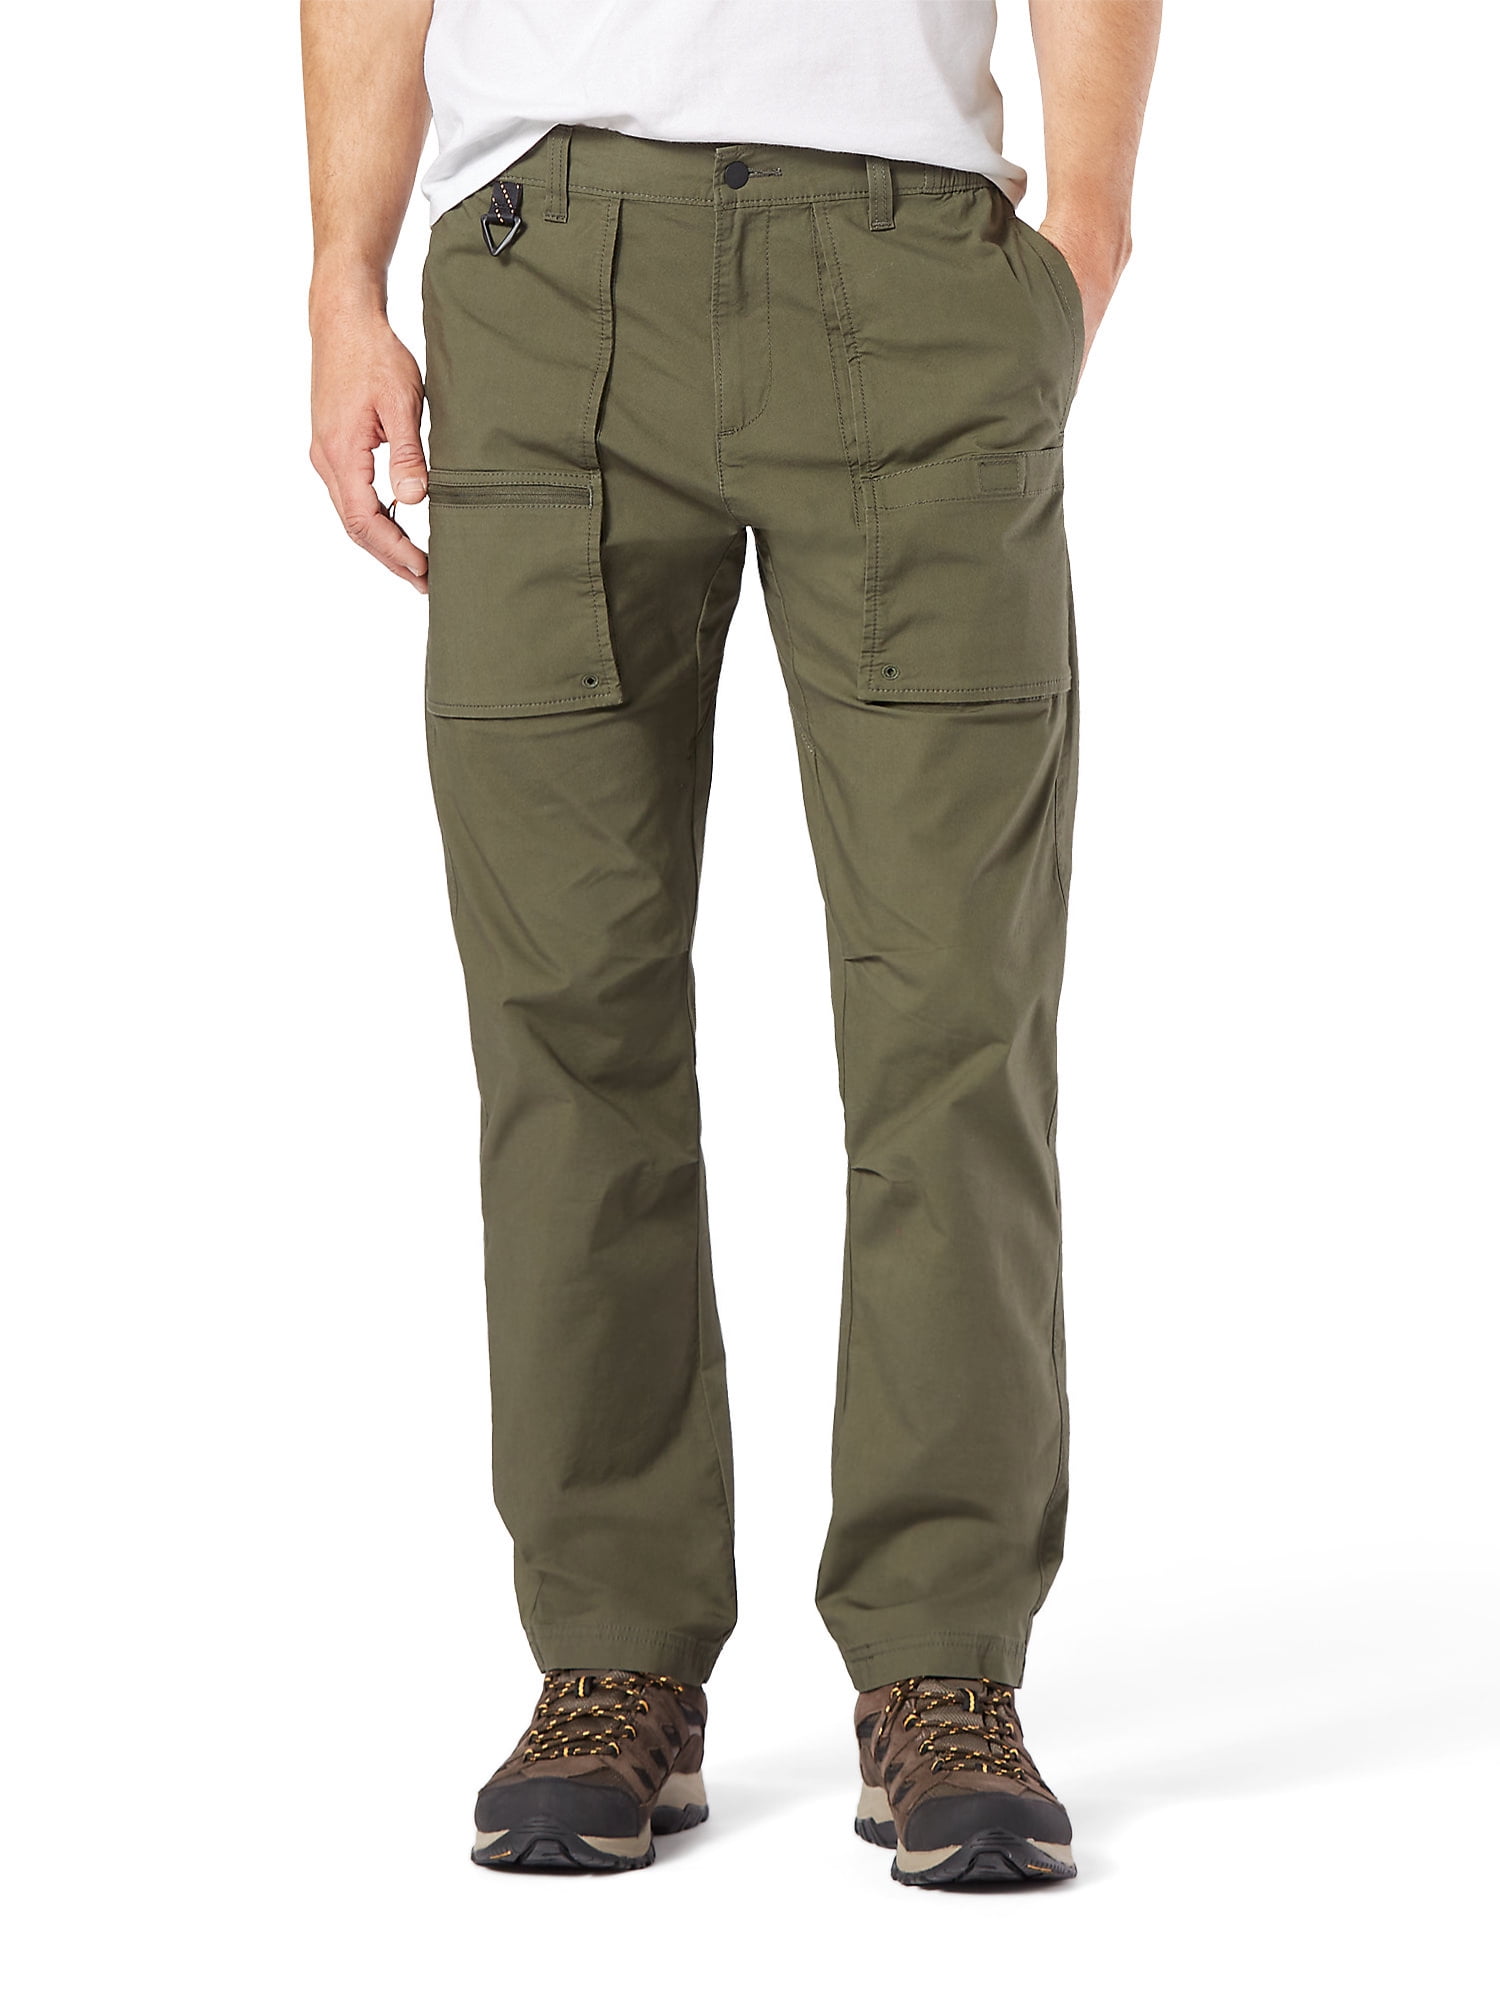 Signature by Levi Strauss & Co. Men's Outdoor Utility Hiking Pant Sizes  28x30-42x30